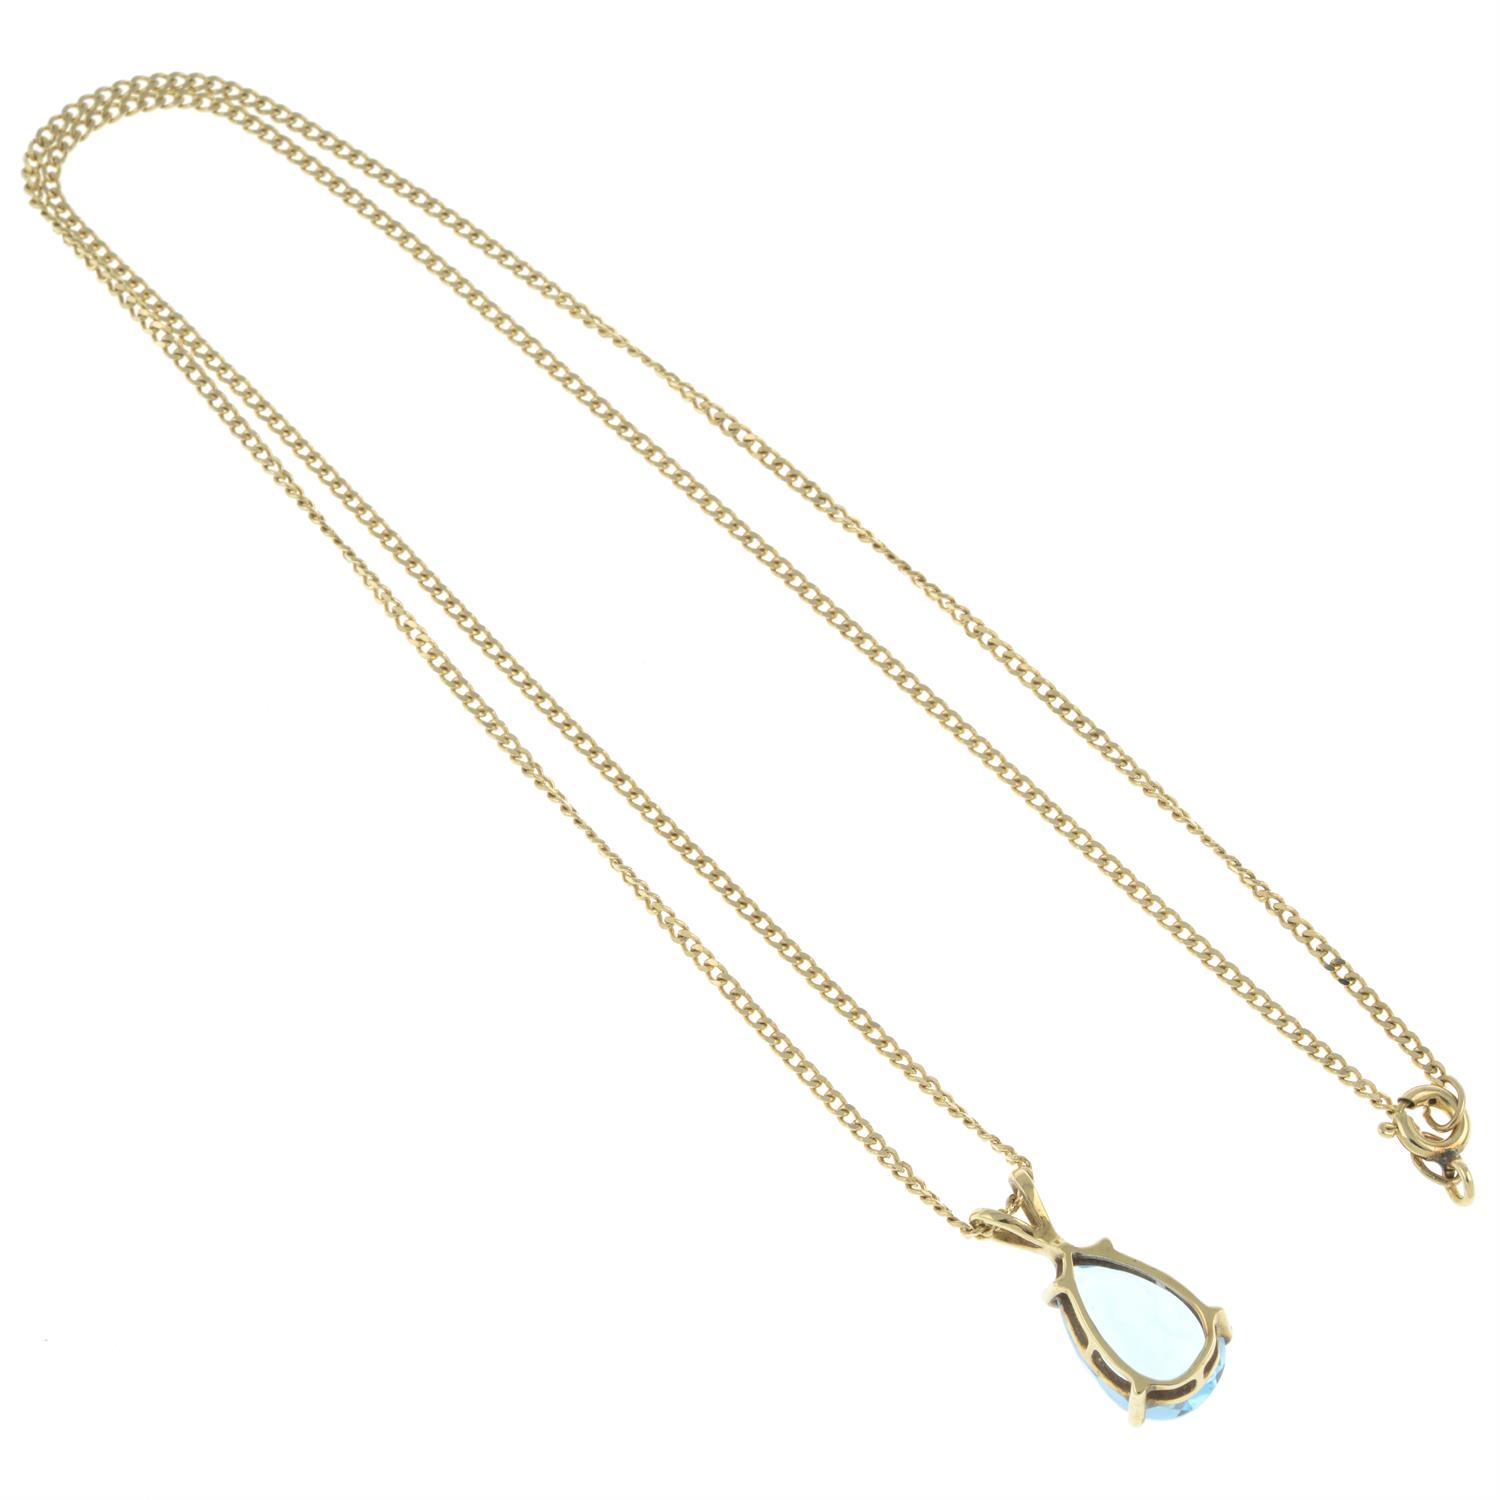 Pear-shape topaz pendant, with 9ct gold chain - Image 2 of 2